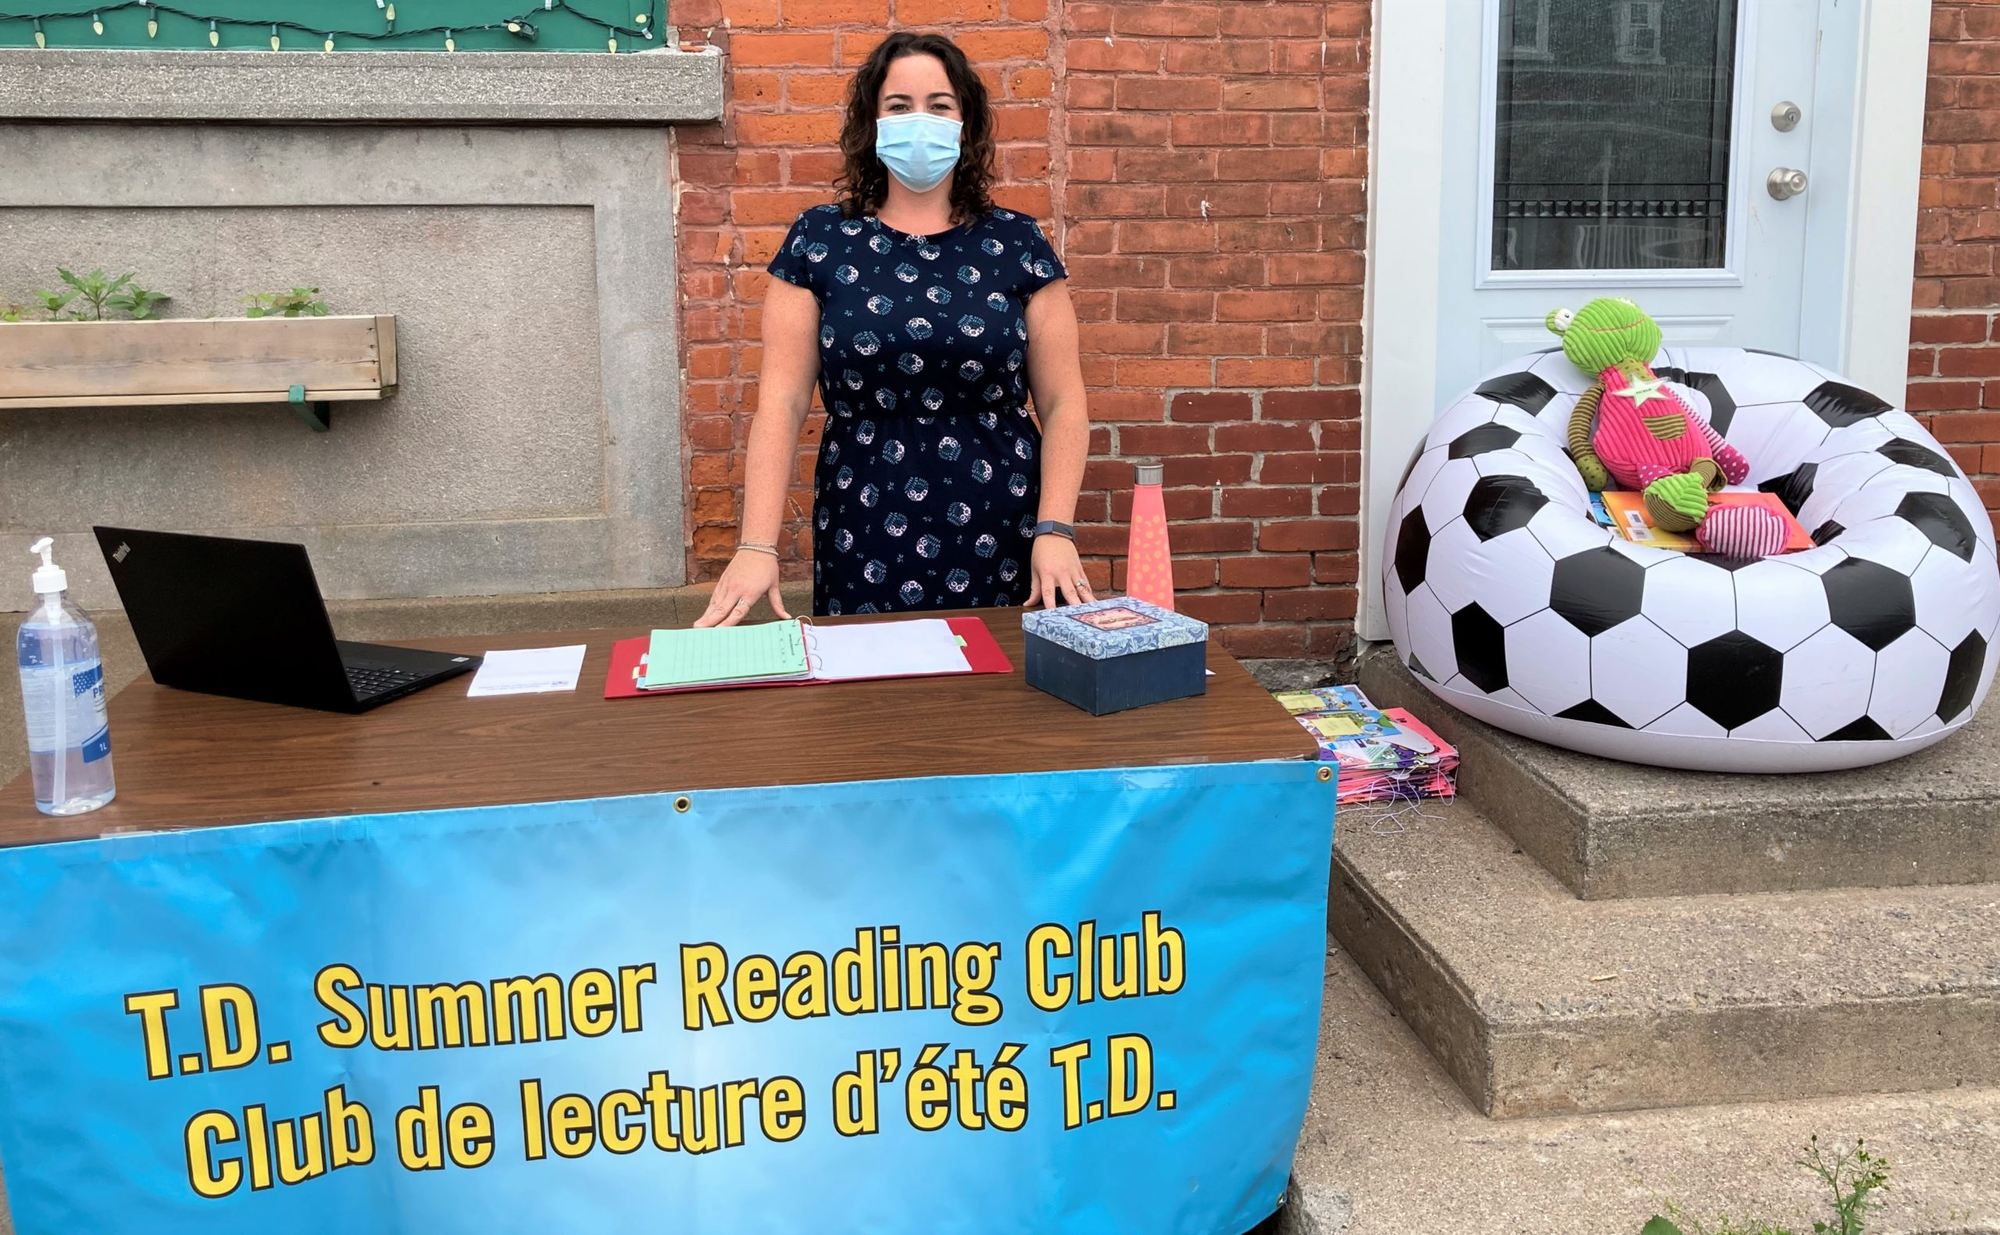 Sign up with the Champlain Library for summer reading